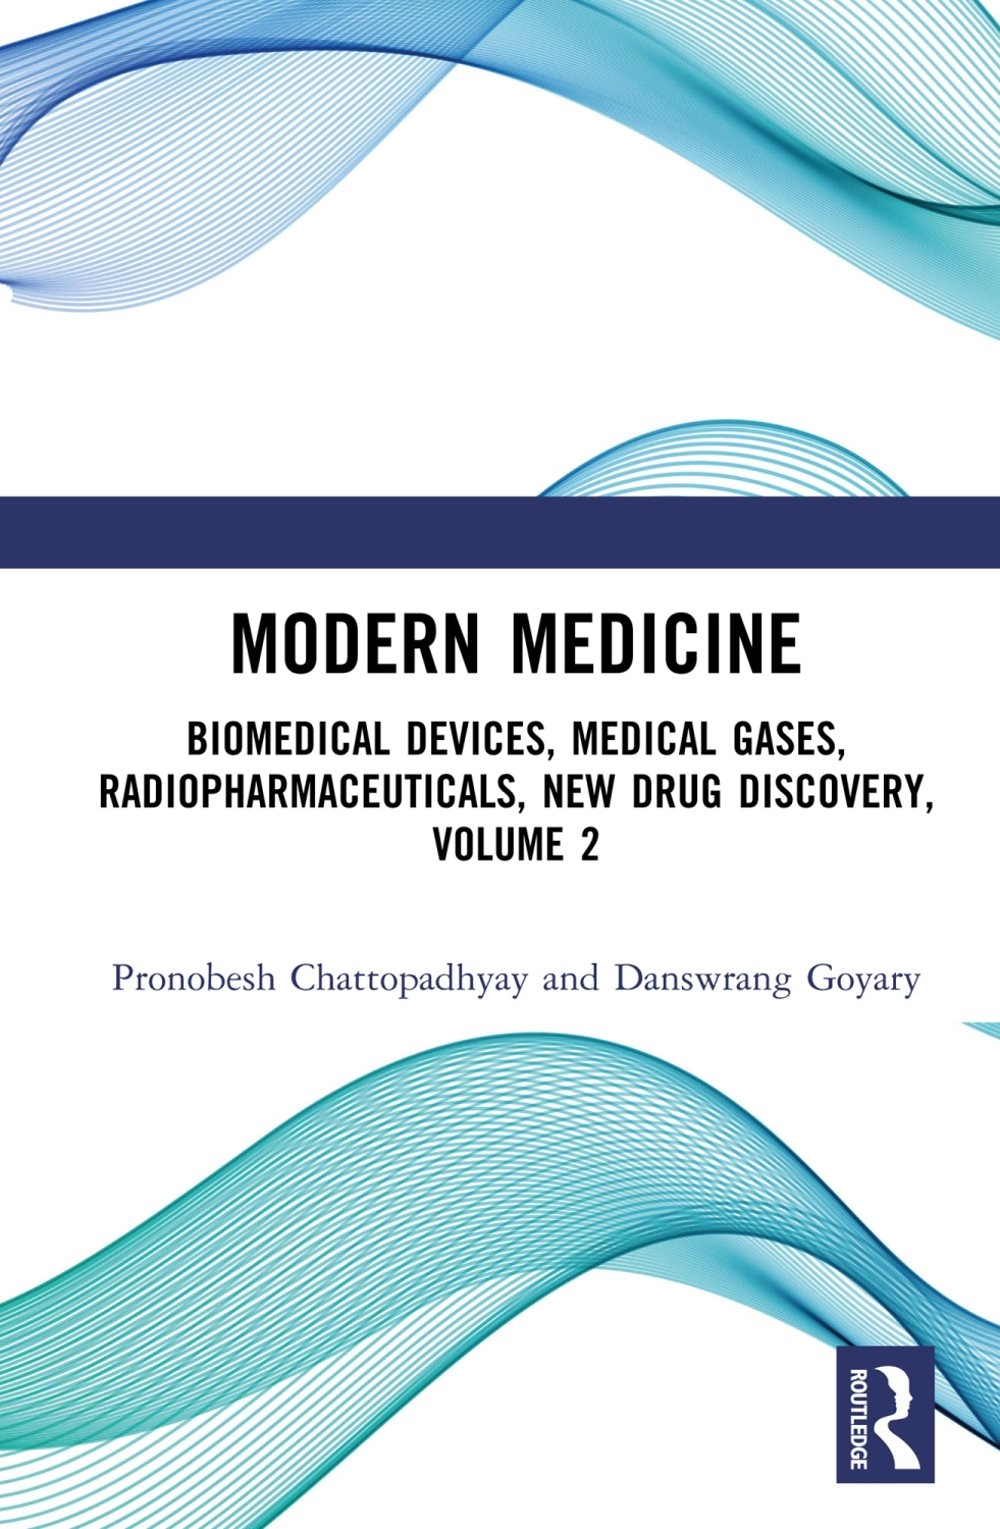 Modern Medicine: Biomedical Device, Medical Gas, Radiopharmaceuticals, New Drug Discovery, Volume 2